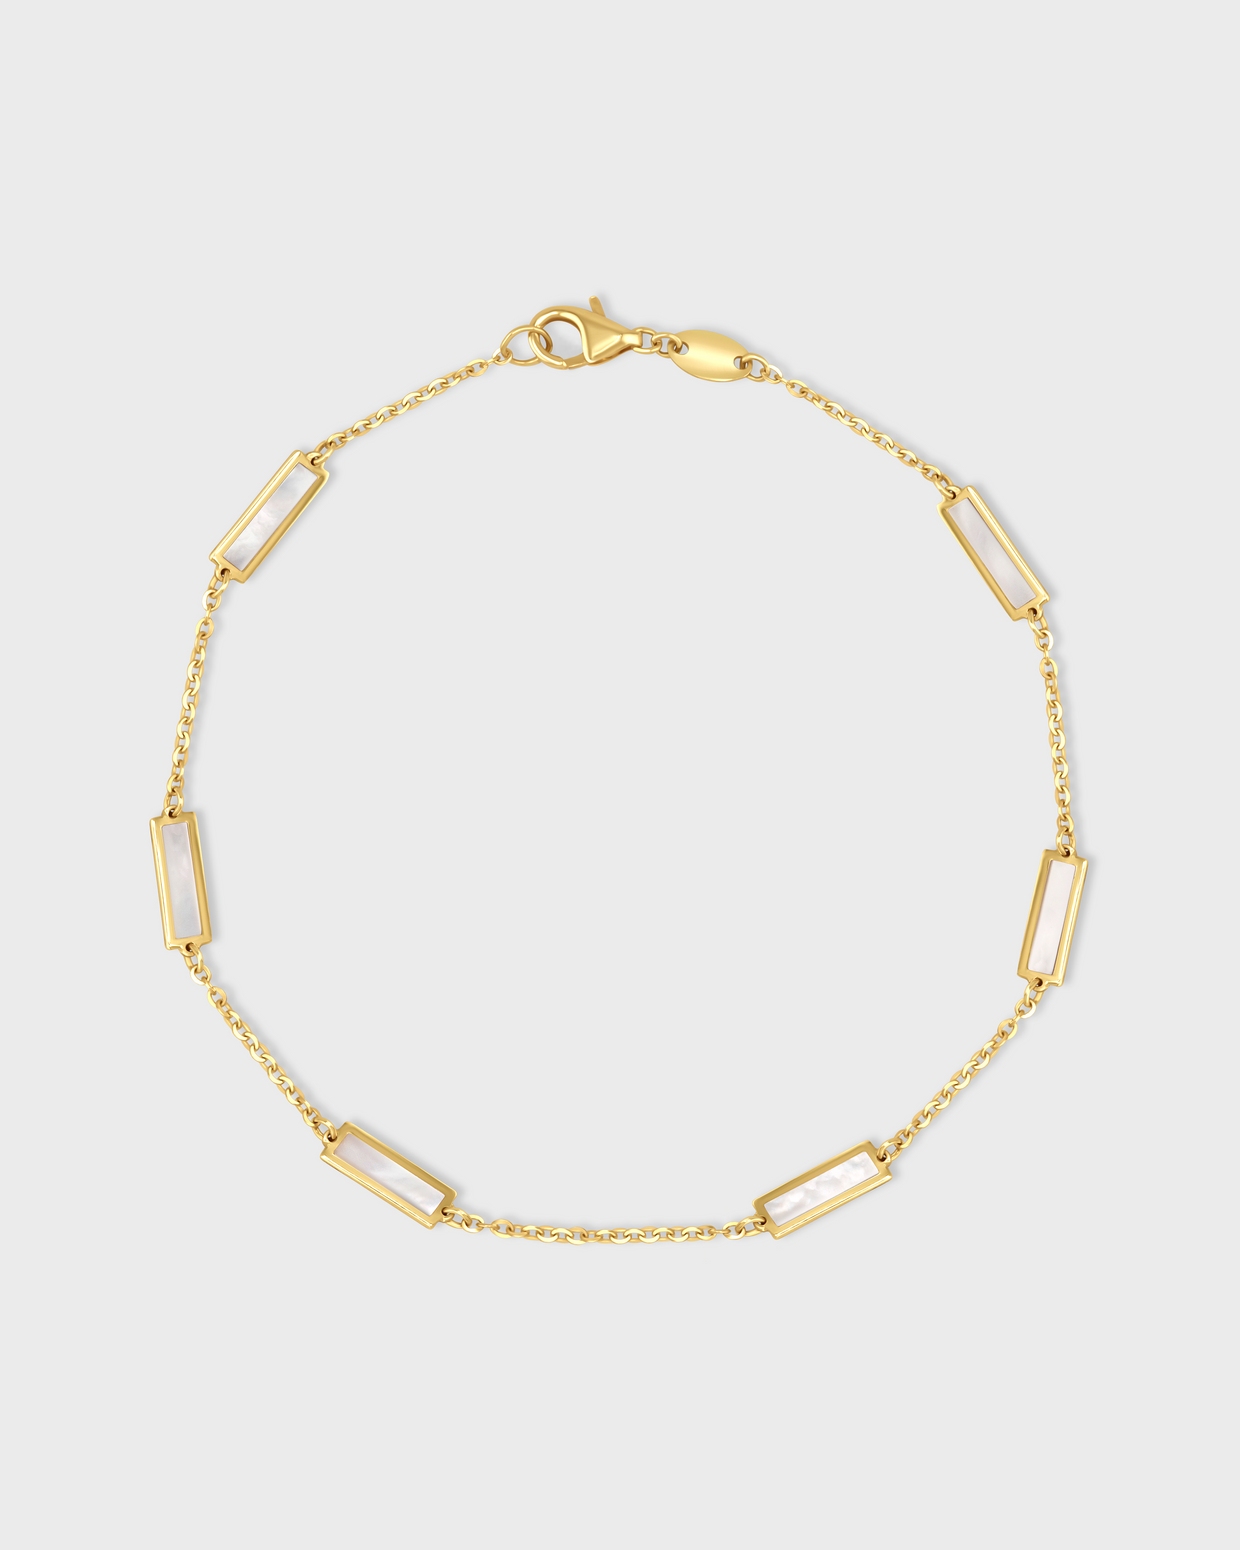 Marquet Mother of Pearl Gold Bar Chain Bracelet